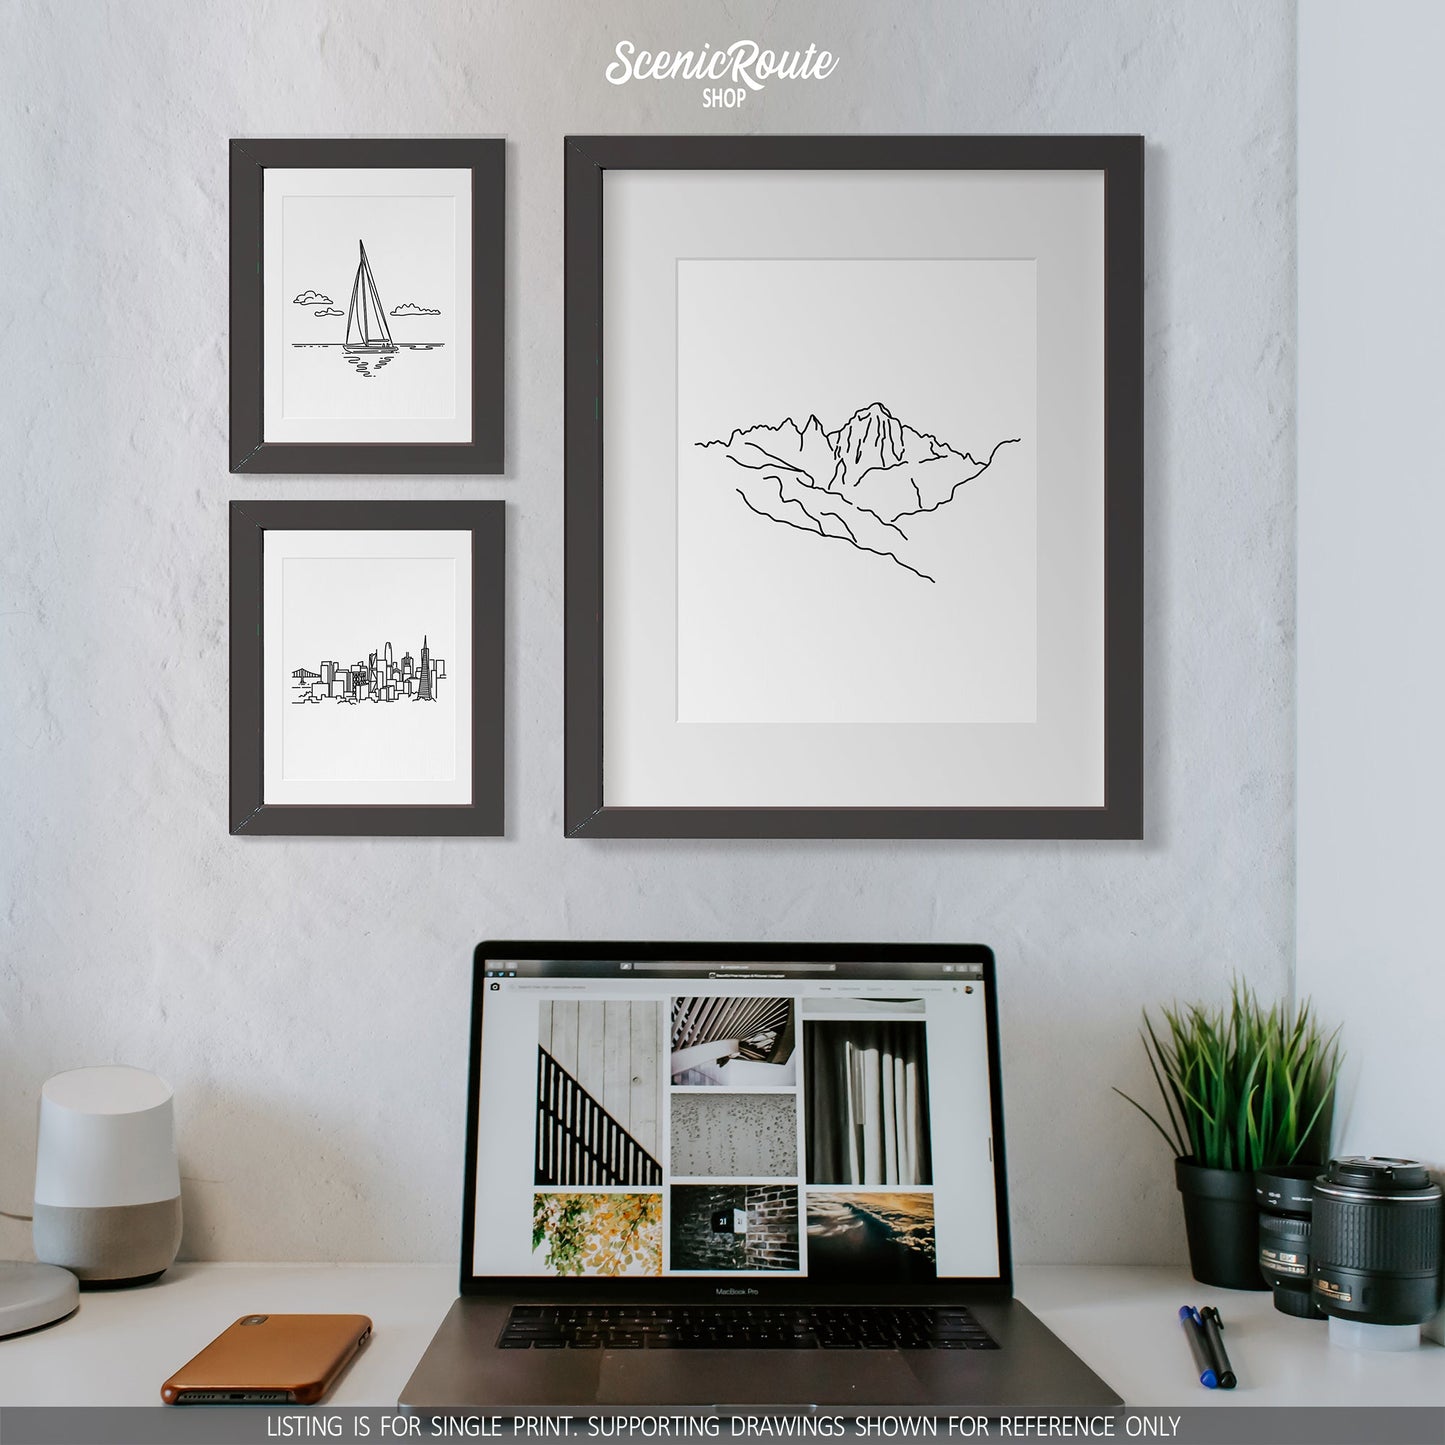 A group of three framed drawings on a wall above a desk with a laptop. The line art drawings include Sailing, the San Francisco Skyline, and Mount Whitney